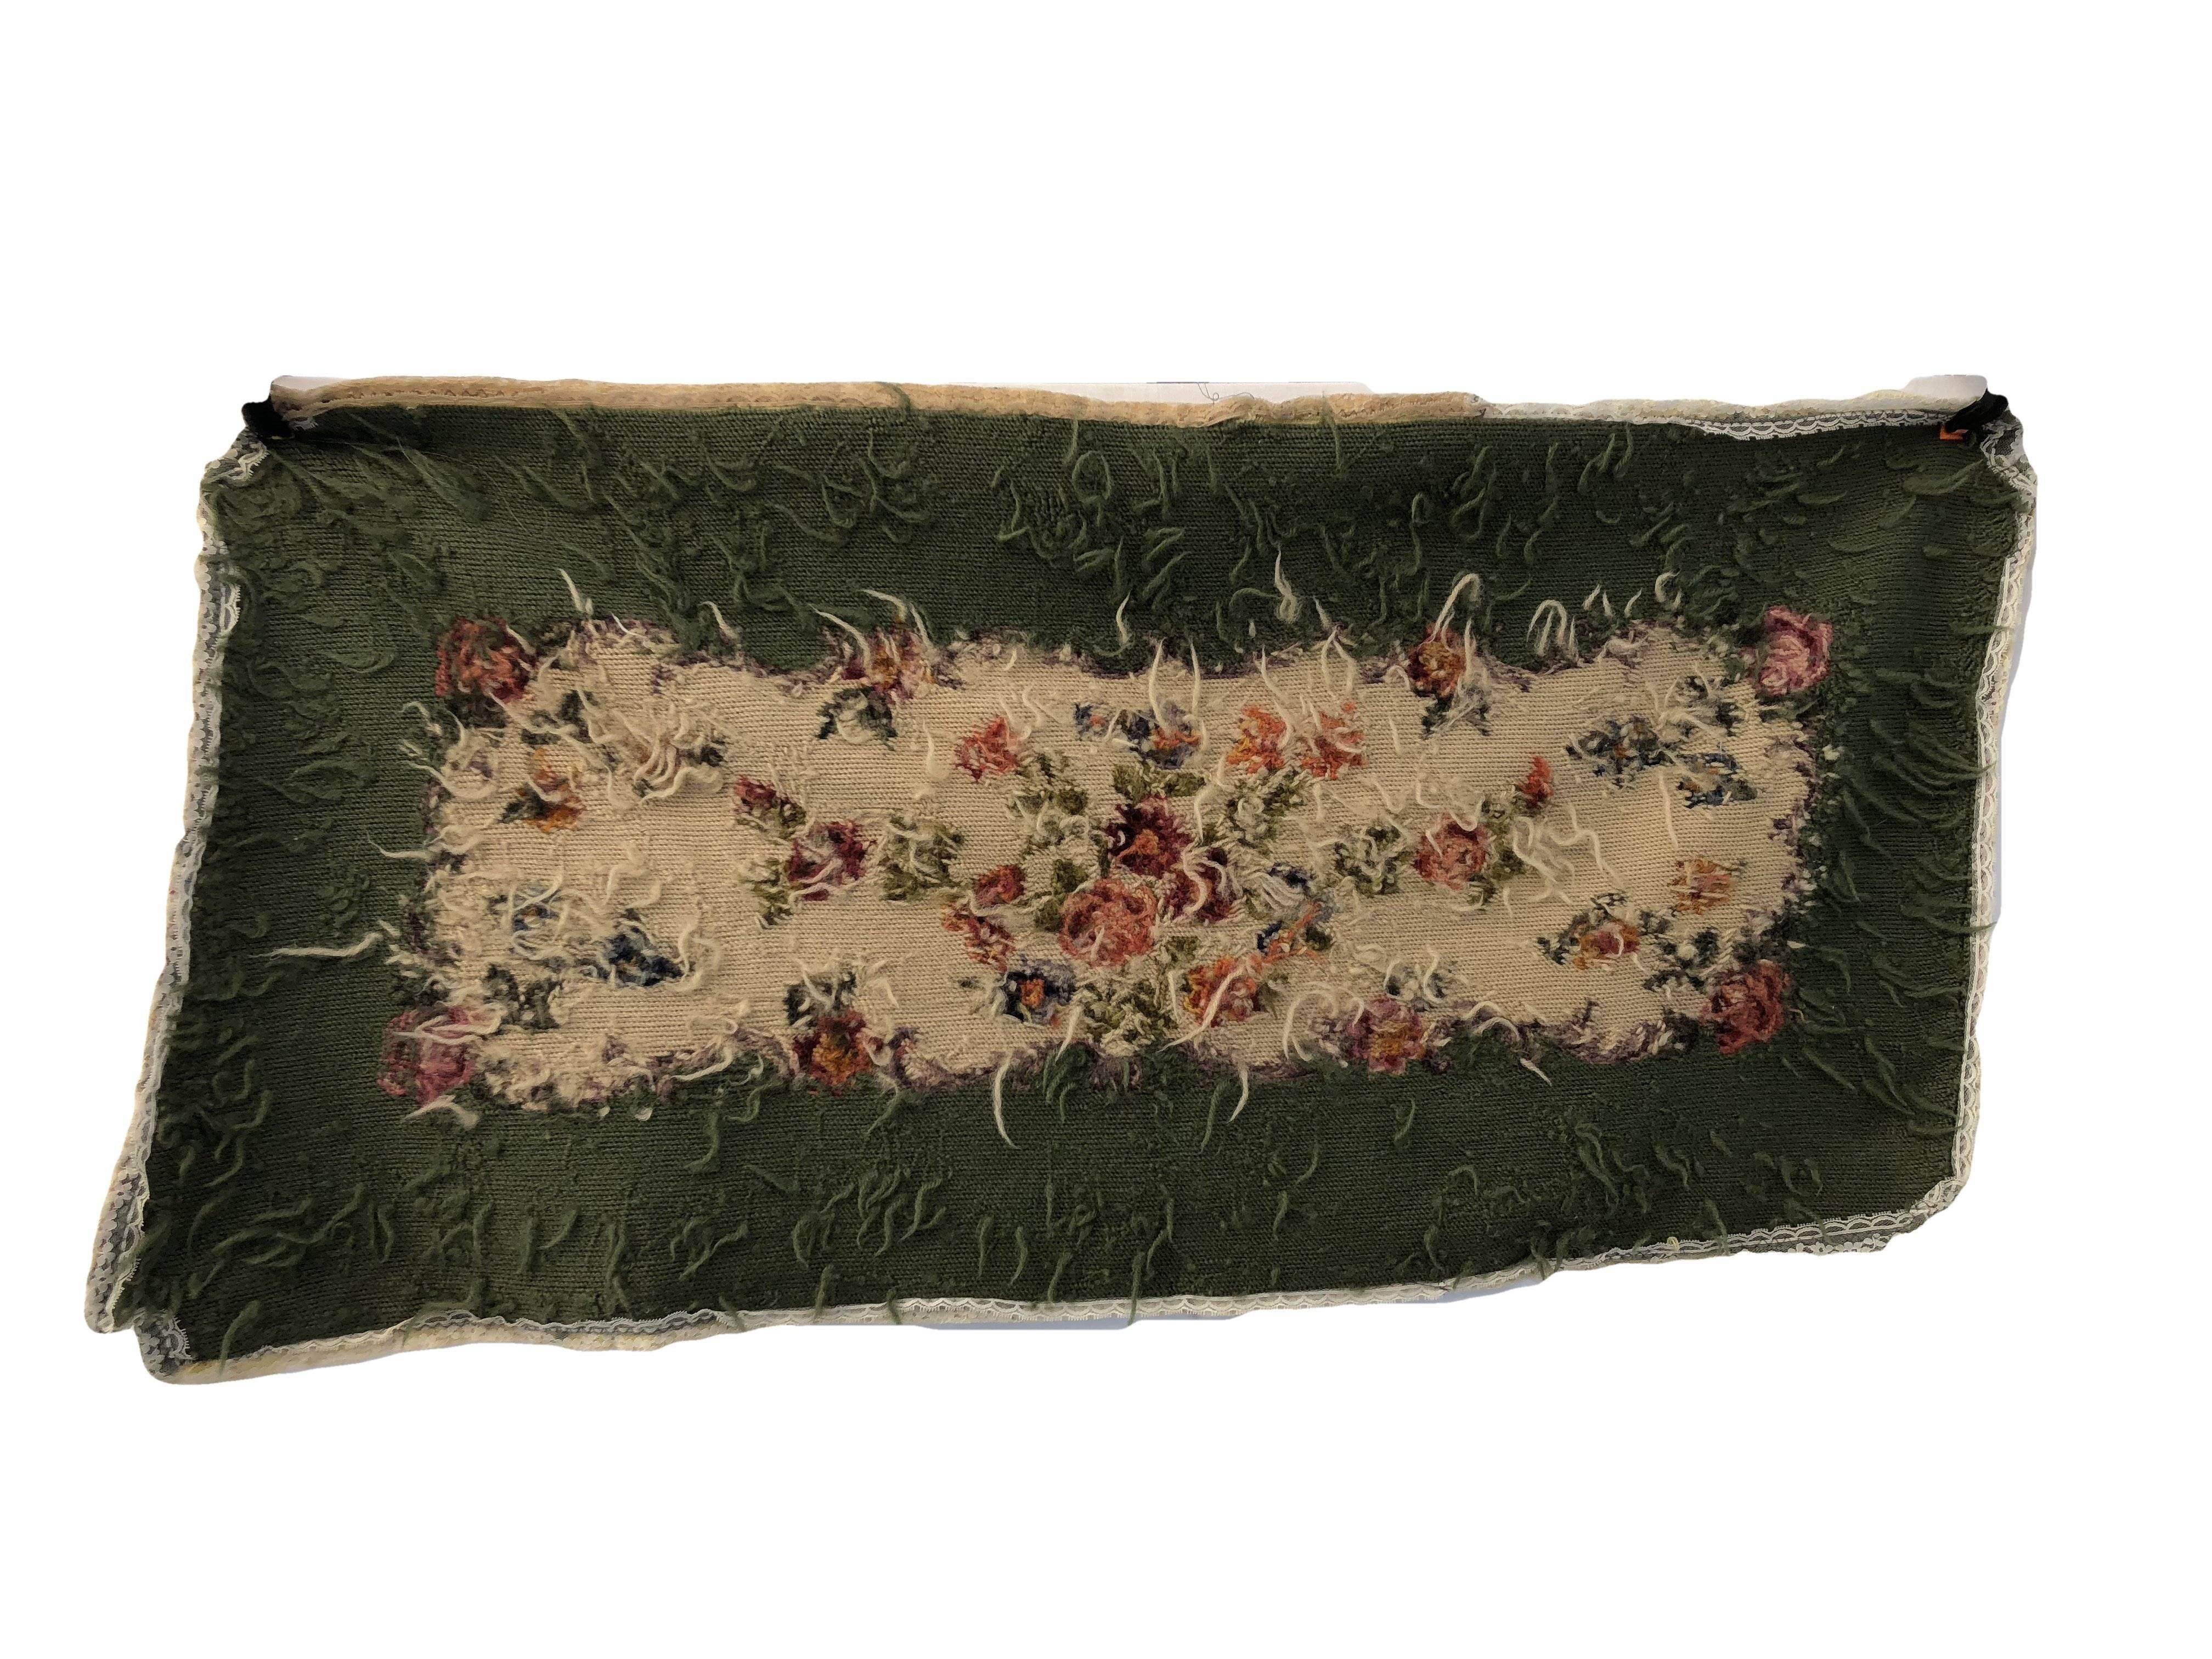 This lovely French silk and wool needlepoint bench cover is in a colorful floral design on a lush green background and finished with lace interior trim. Used as a bench cover or made into a pillow it would add an elegant decorative touch to any room.